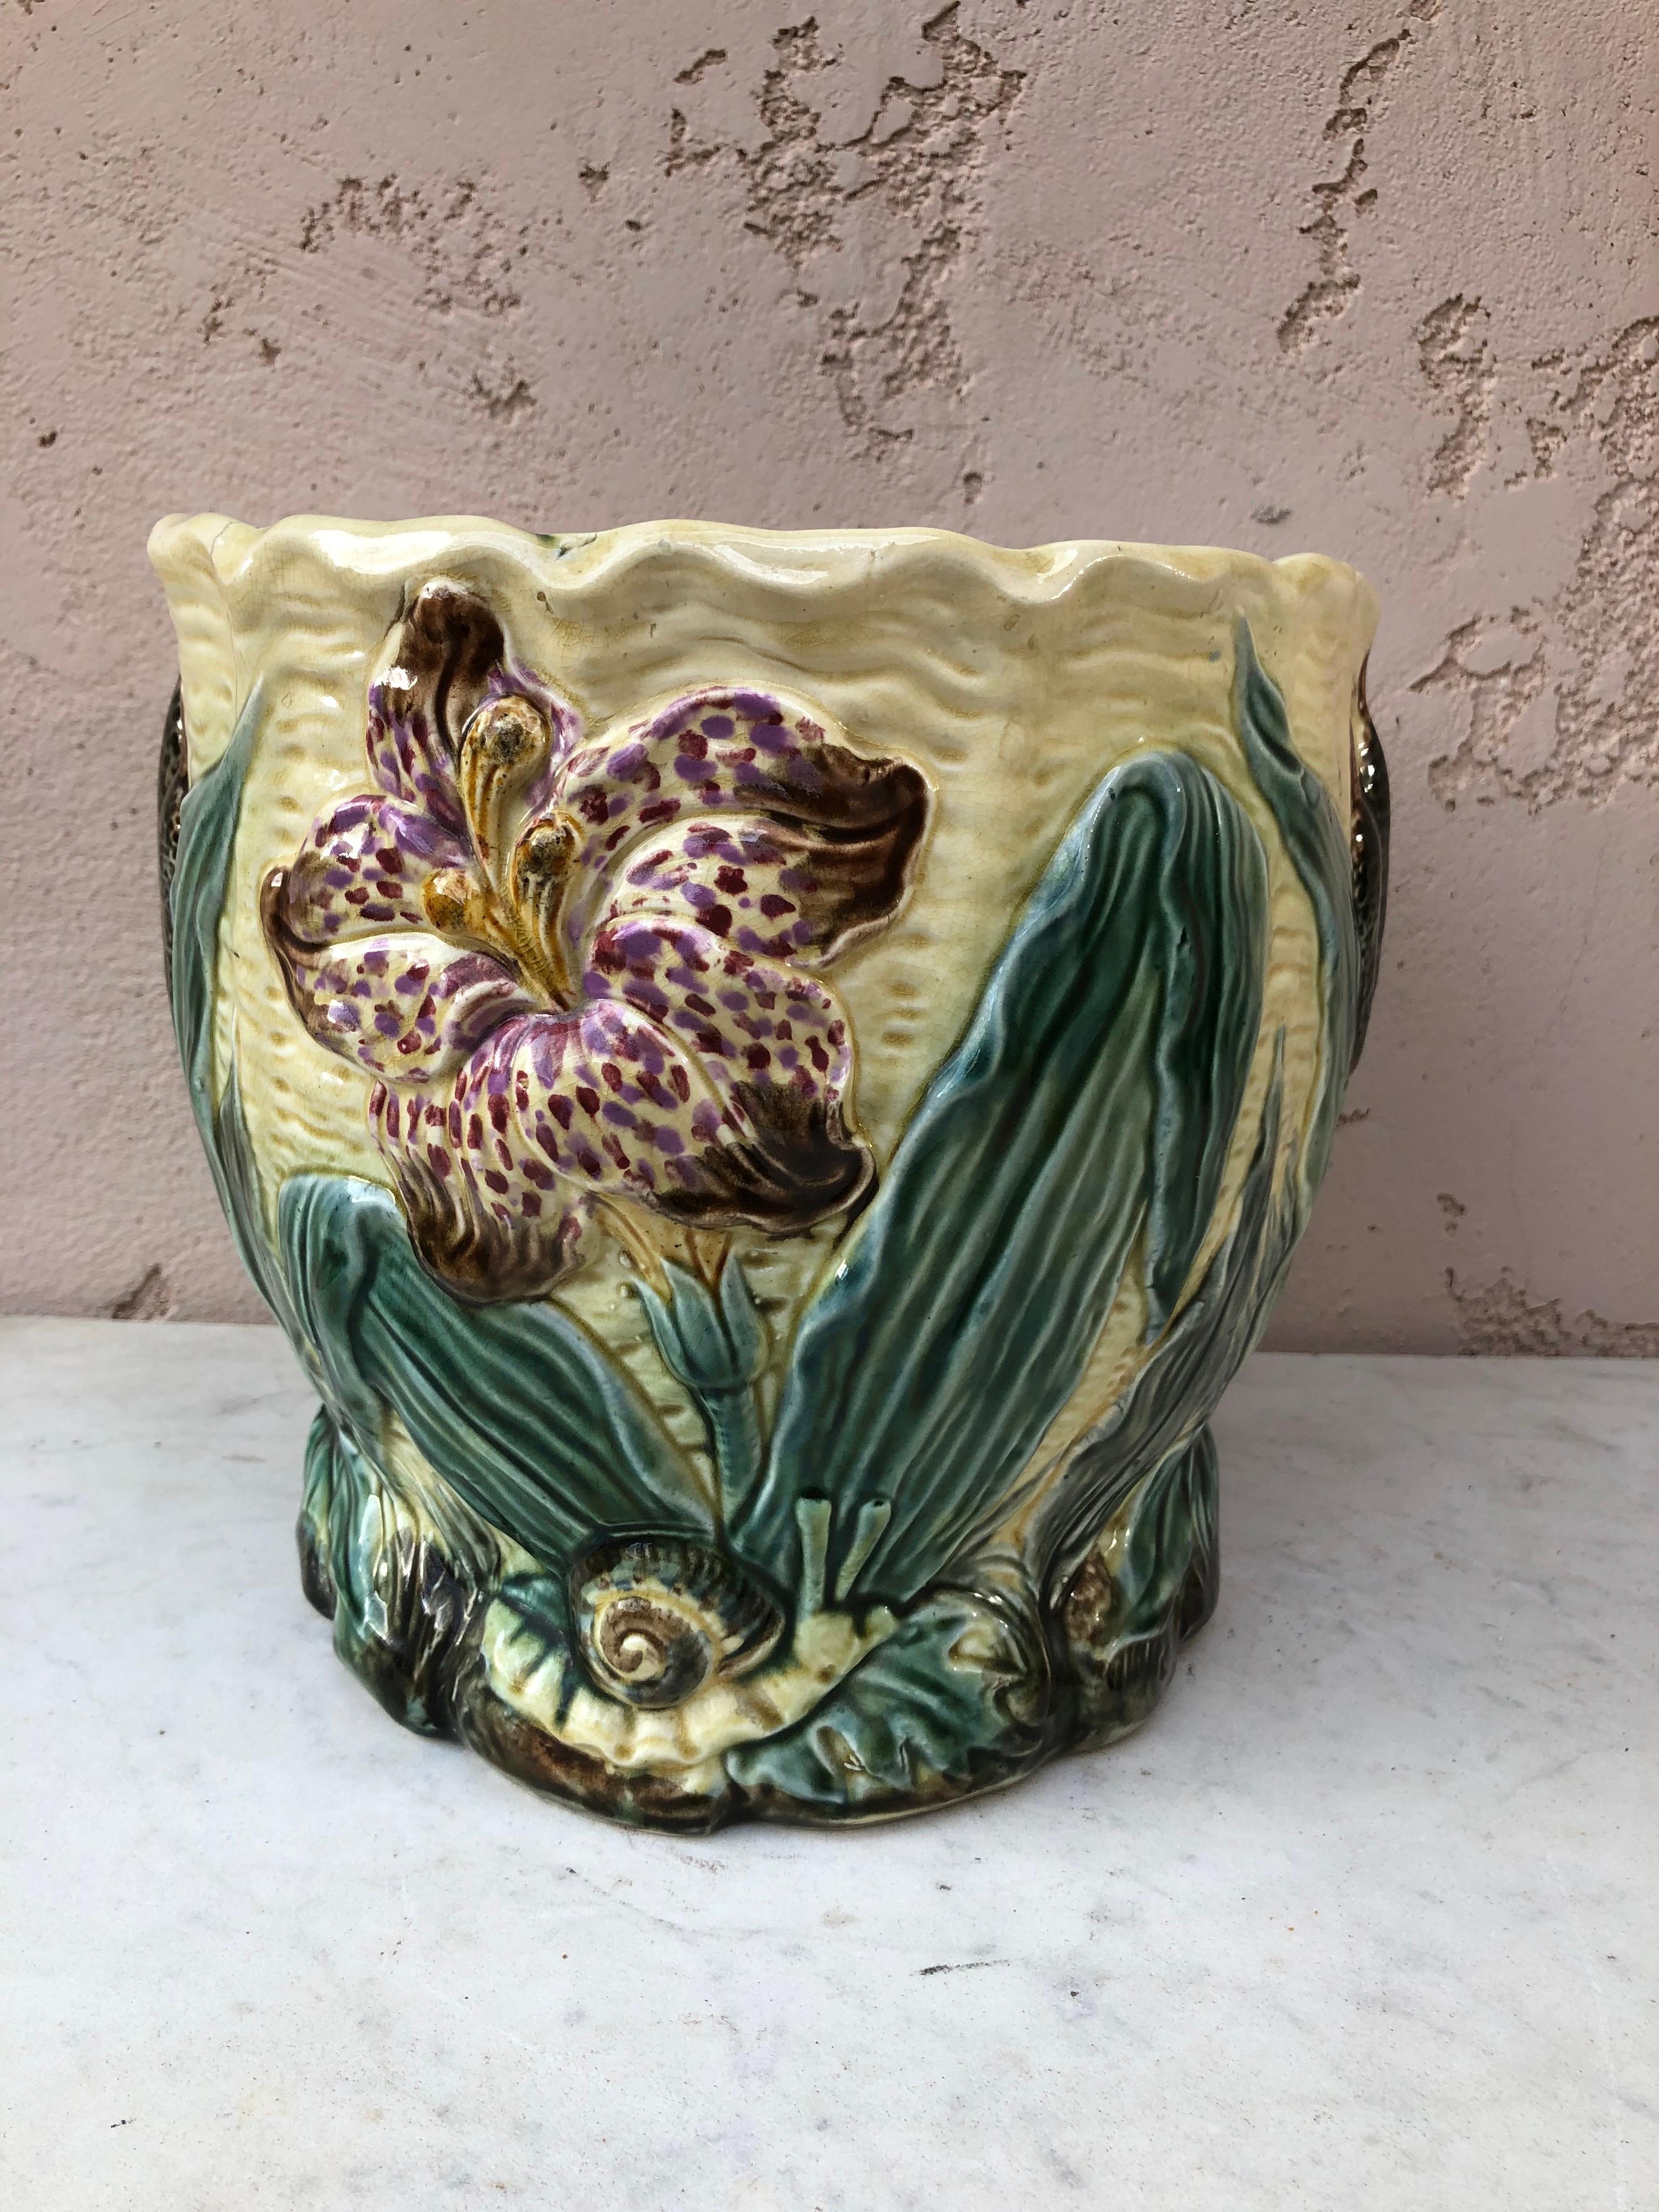 Unusual 19th century planter or cachepot jardinière flower and snail Wasmuel.